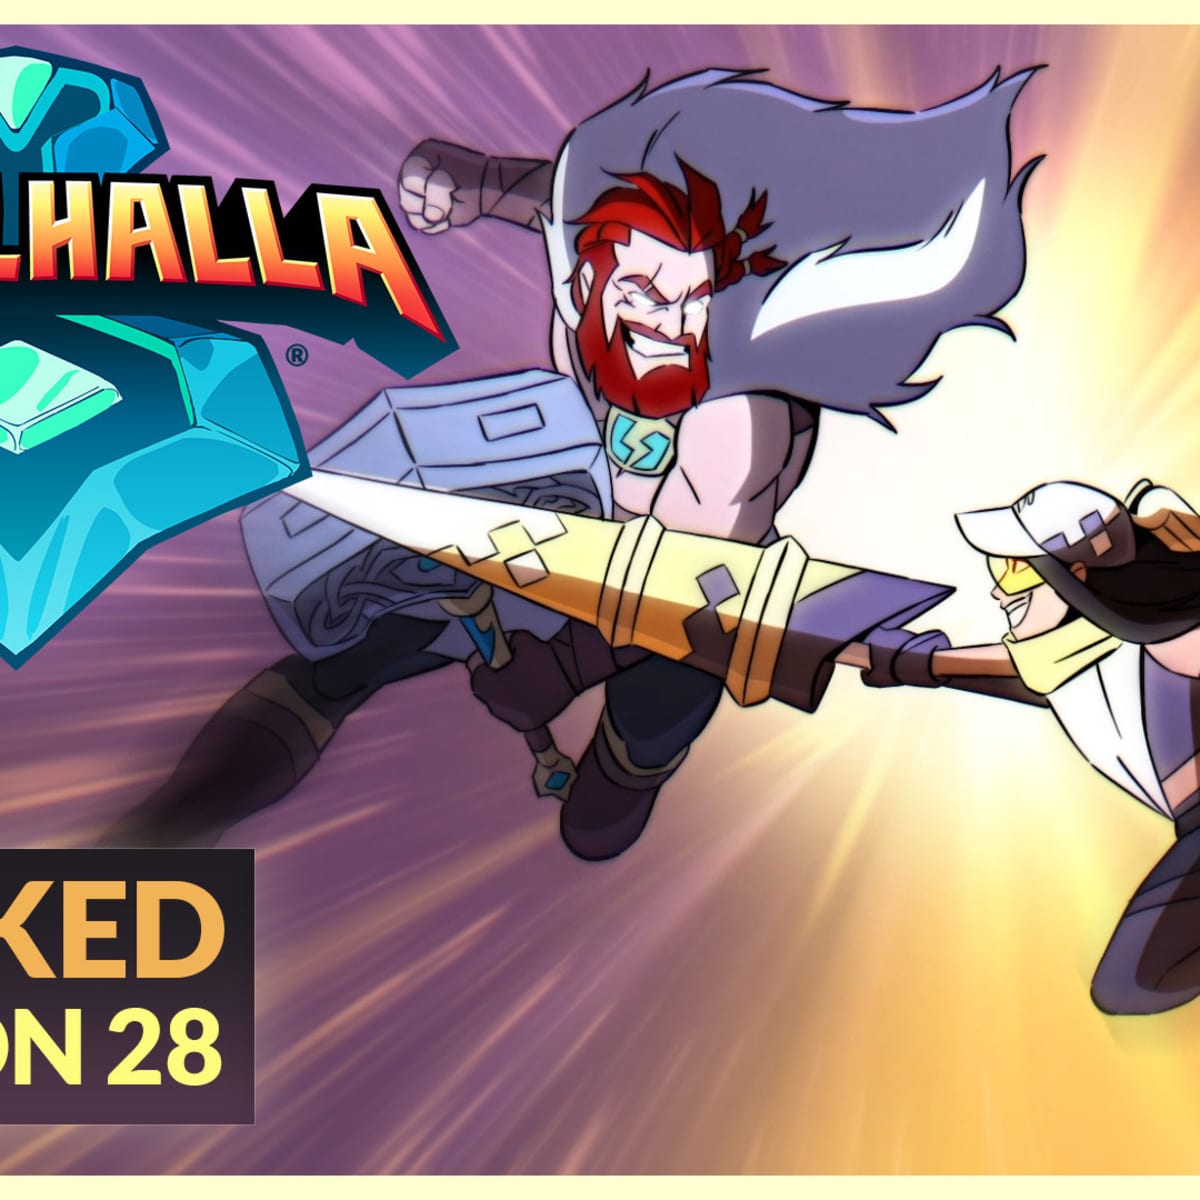 What Is The BIGGEST Elo Boost In Brawlhalla 